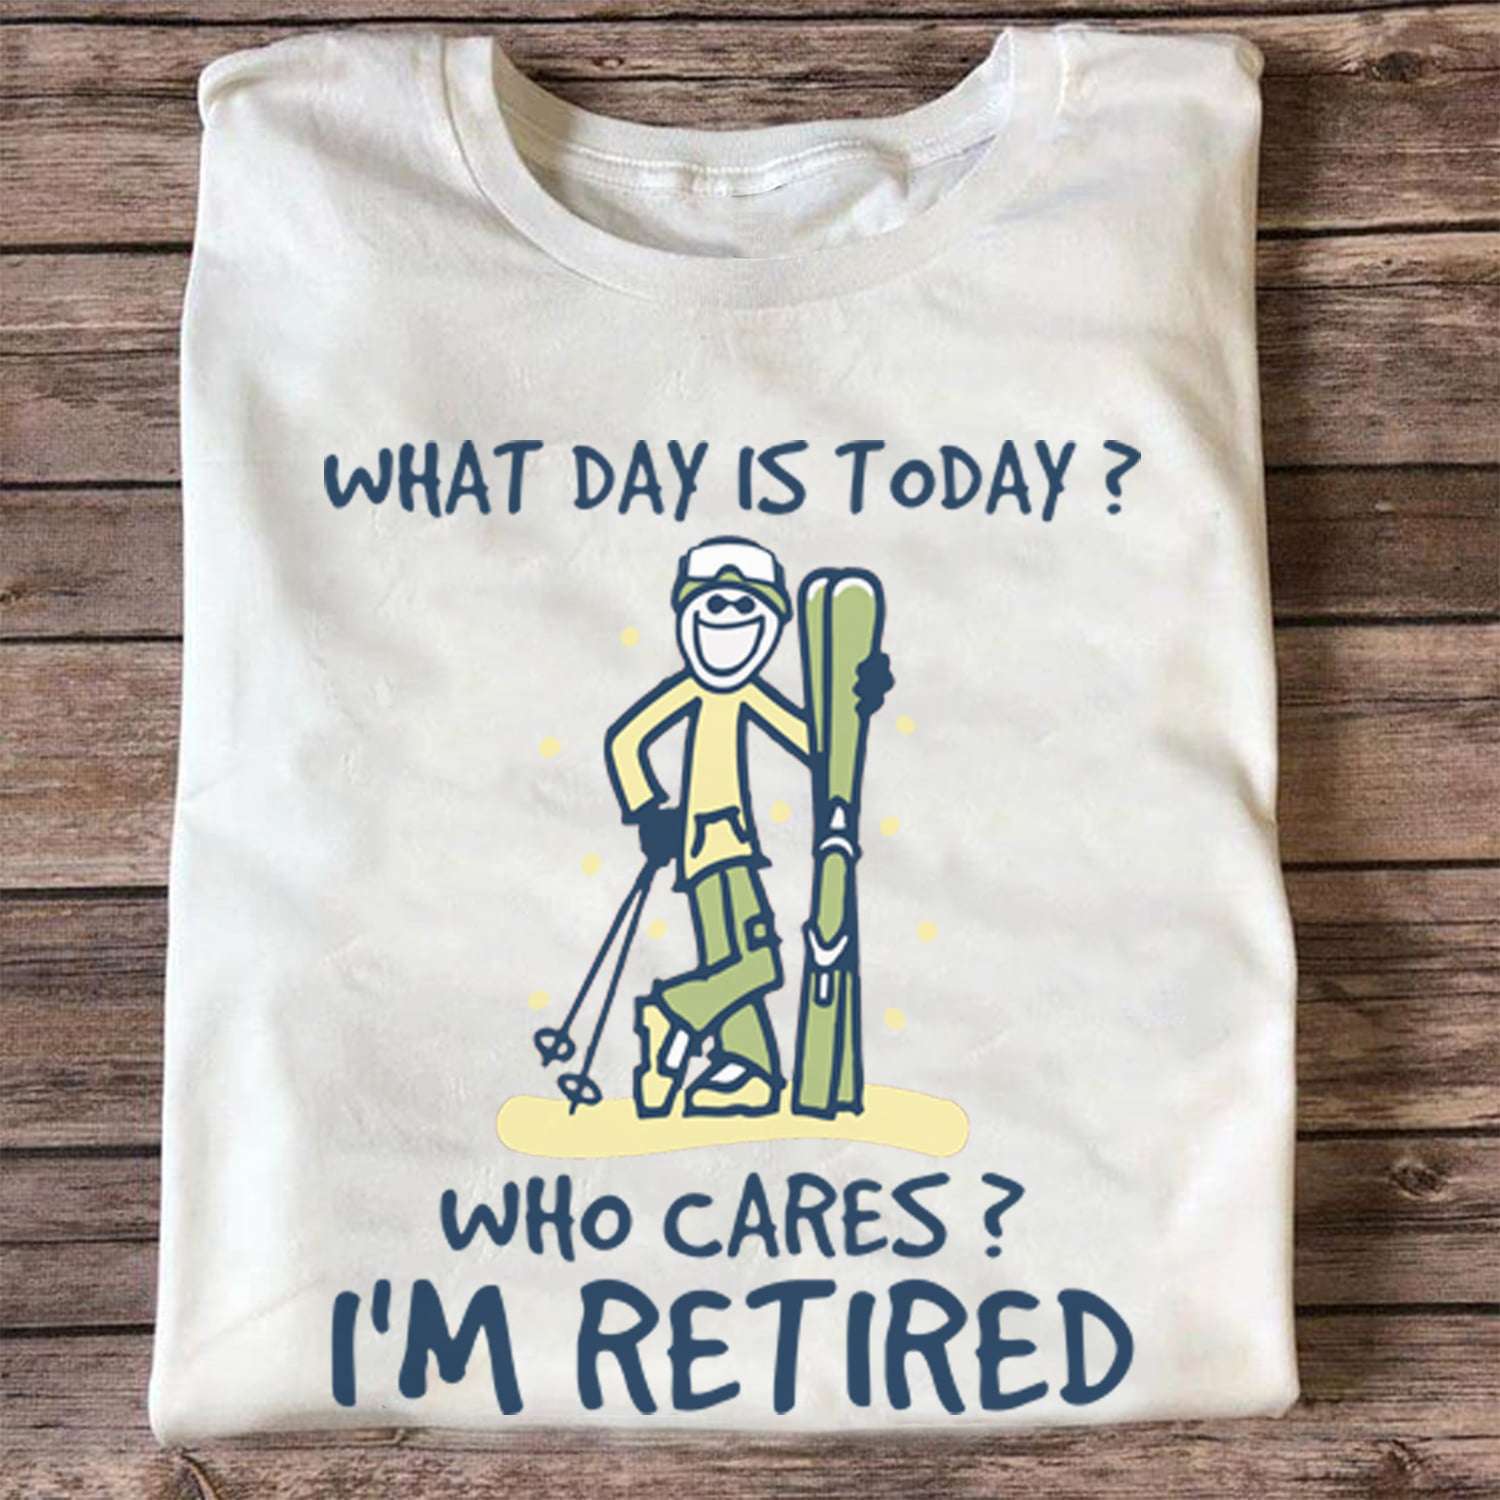 What day is today Who cares I'm retired - Love to go skiing, retired people skiing